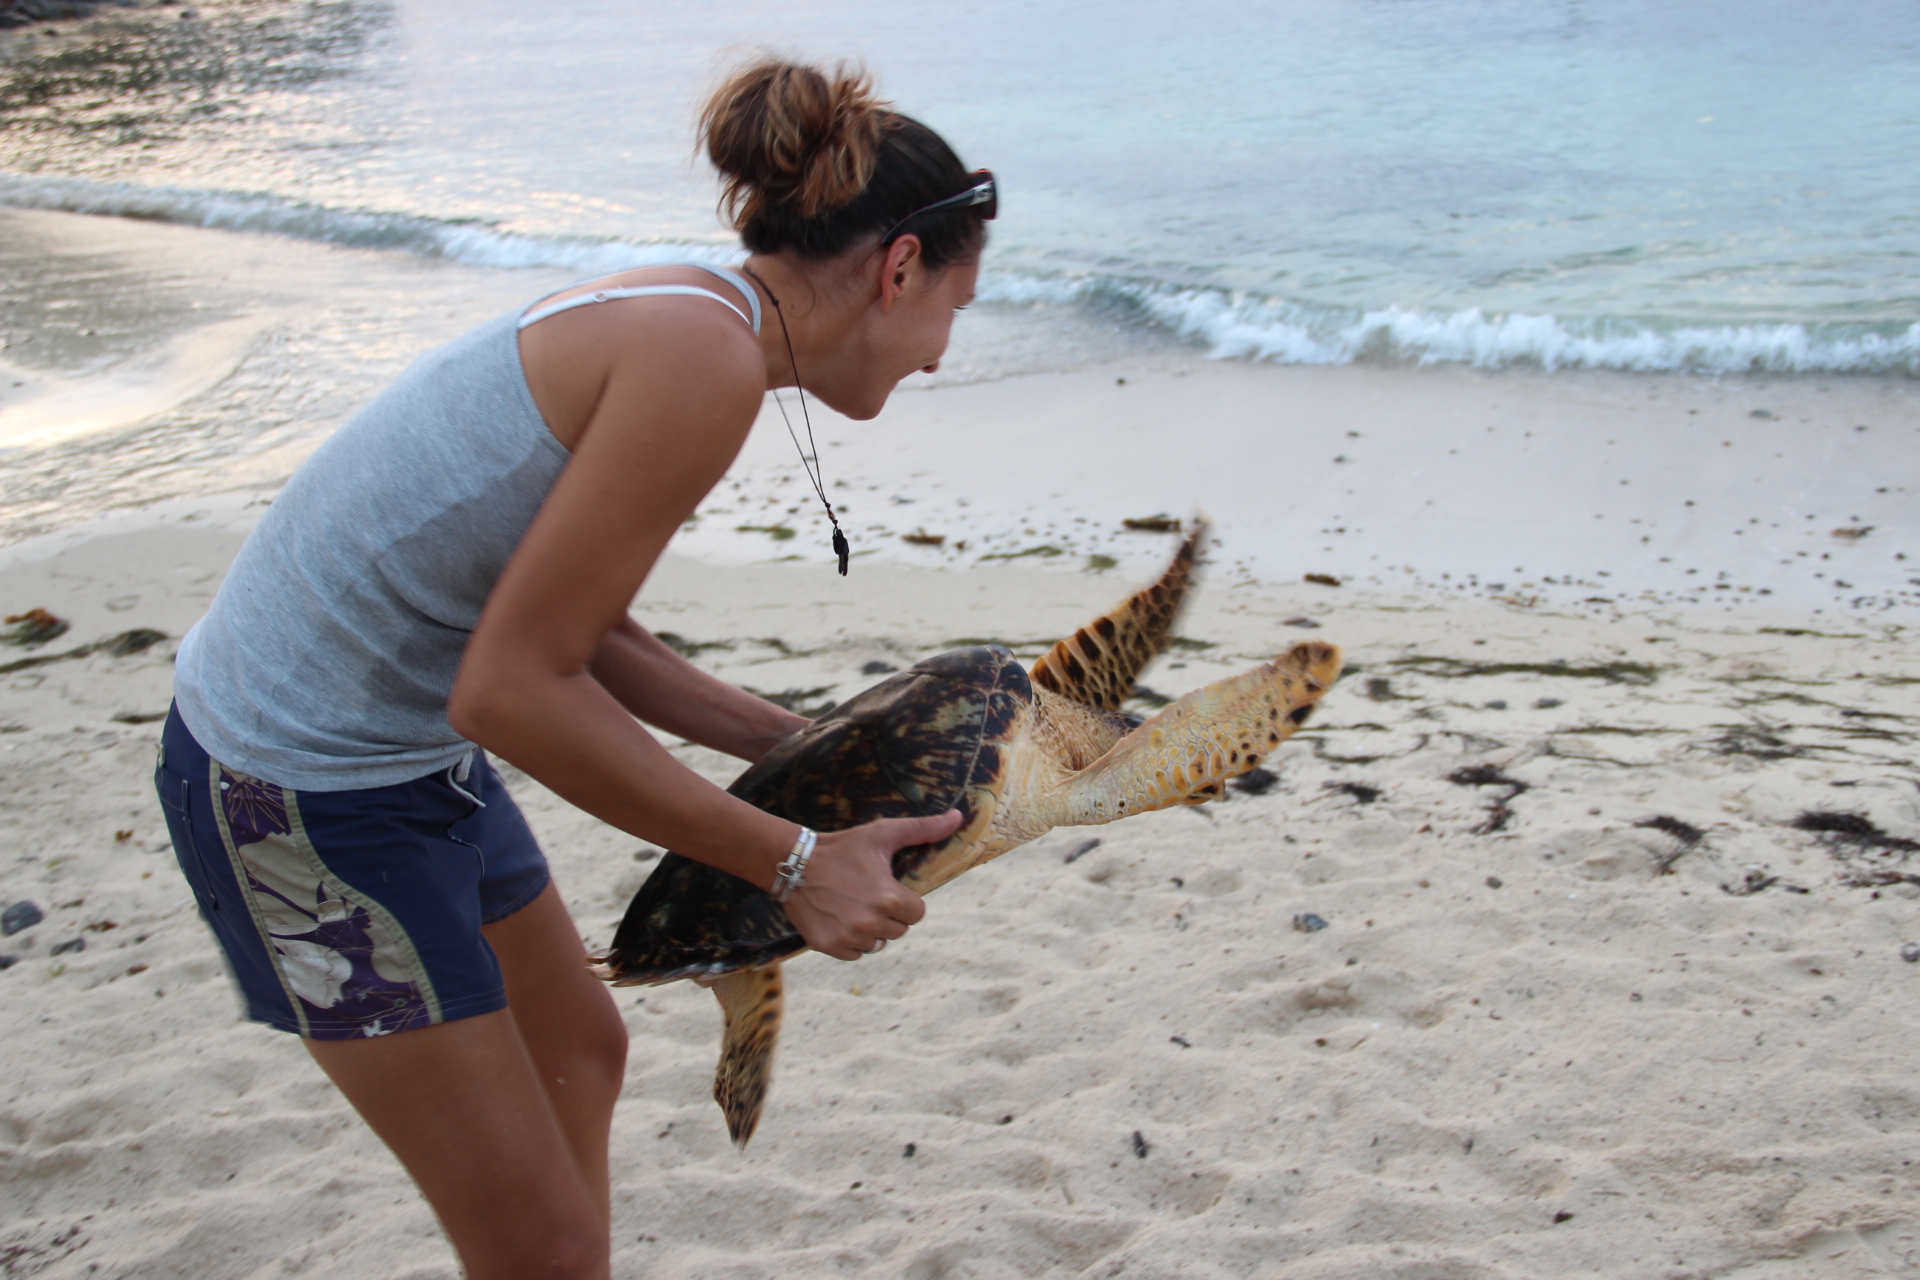 Releasing the turtle back to the sea